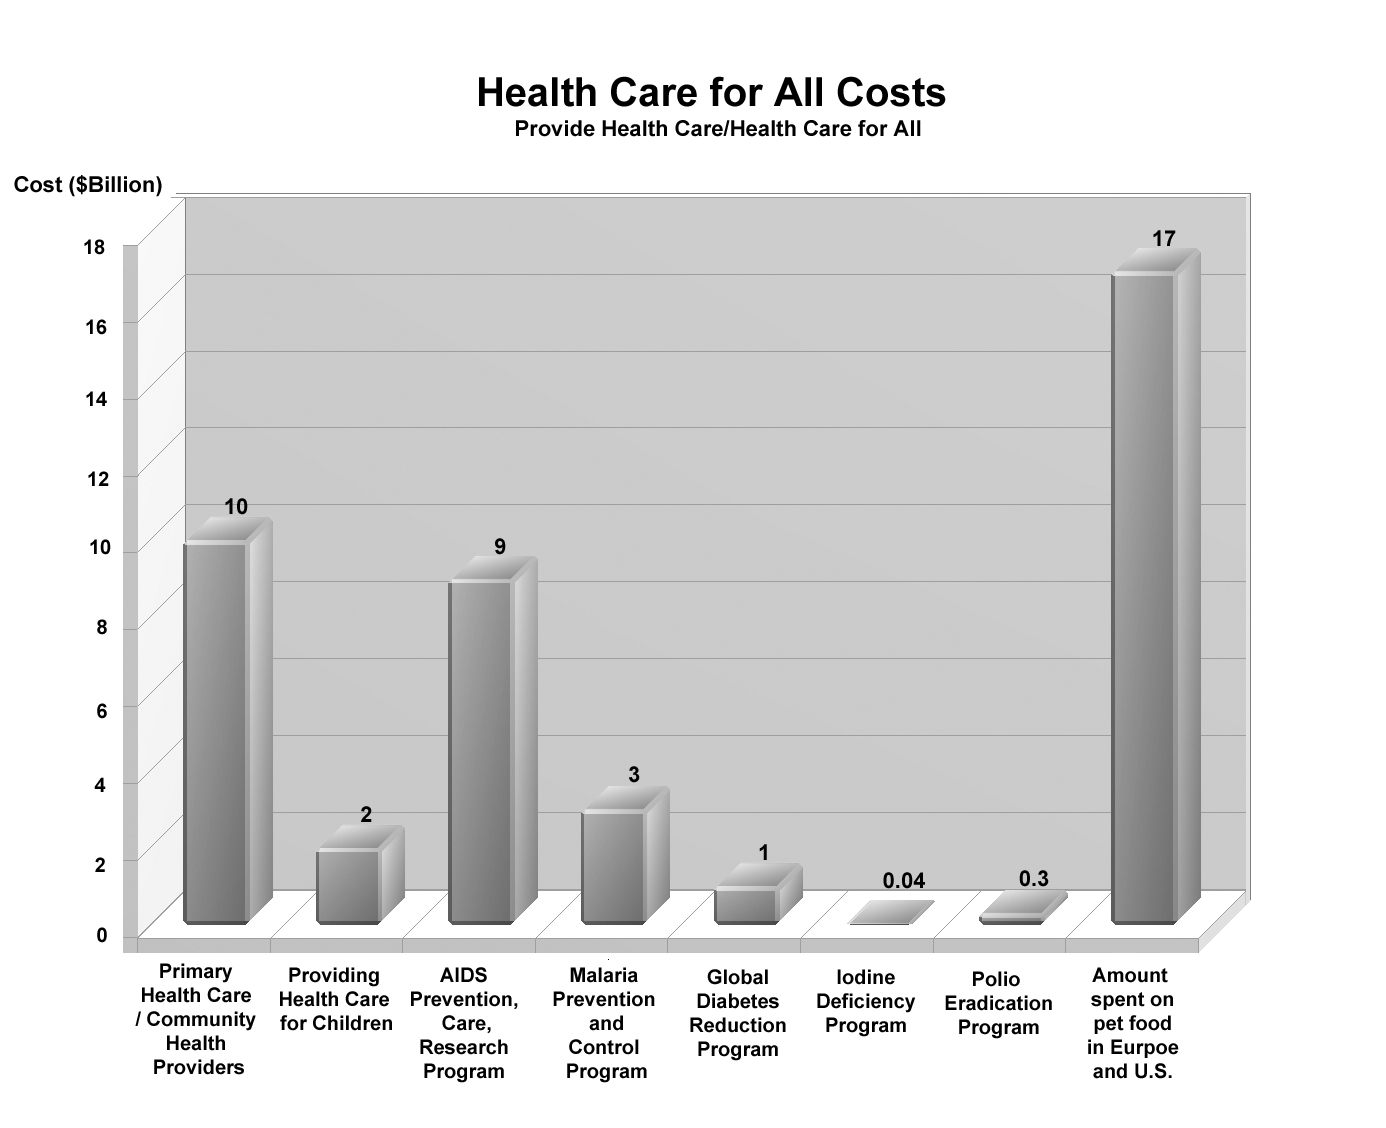 Costs of health care for all